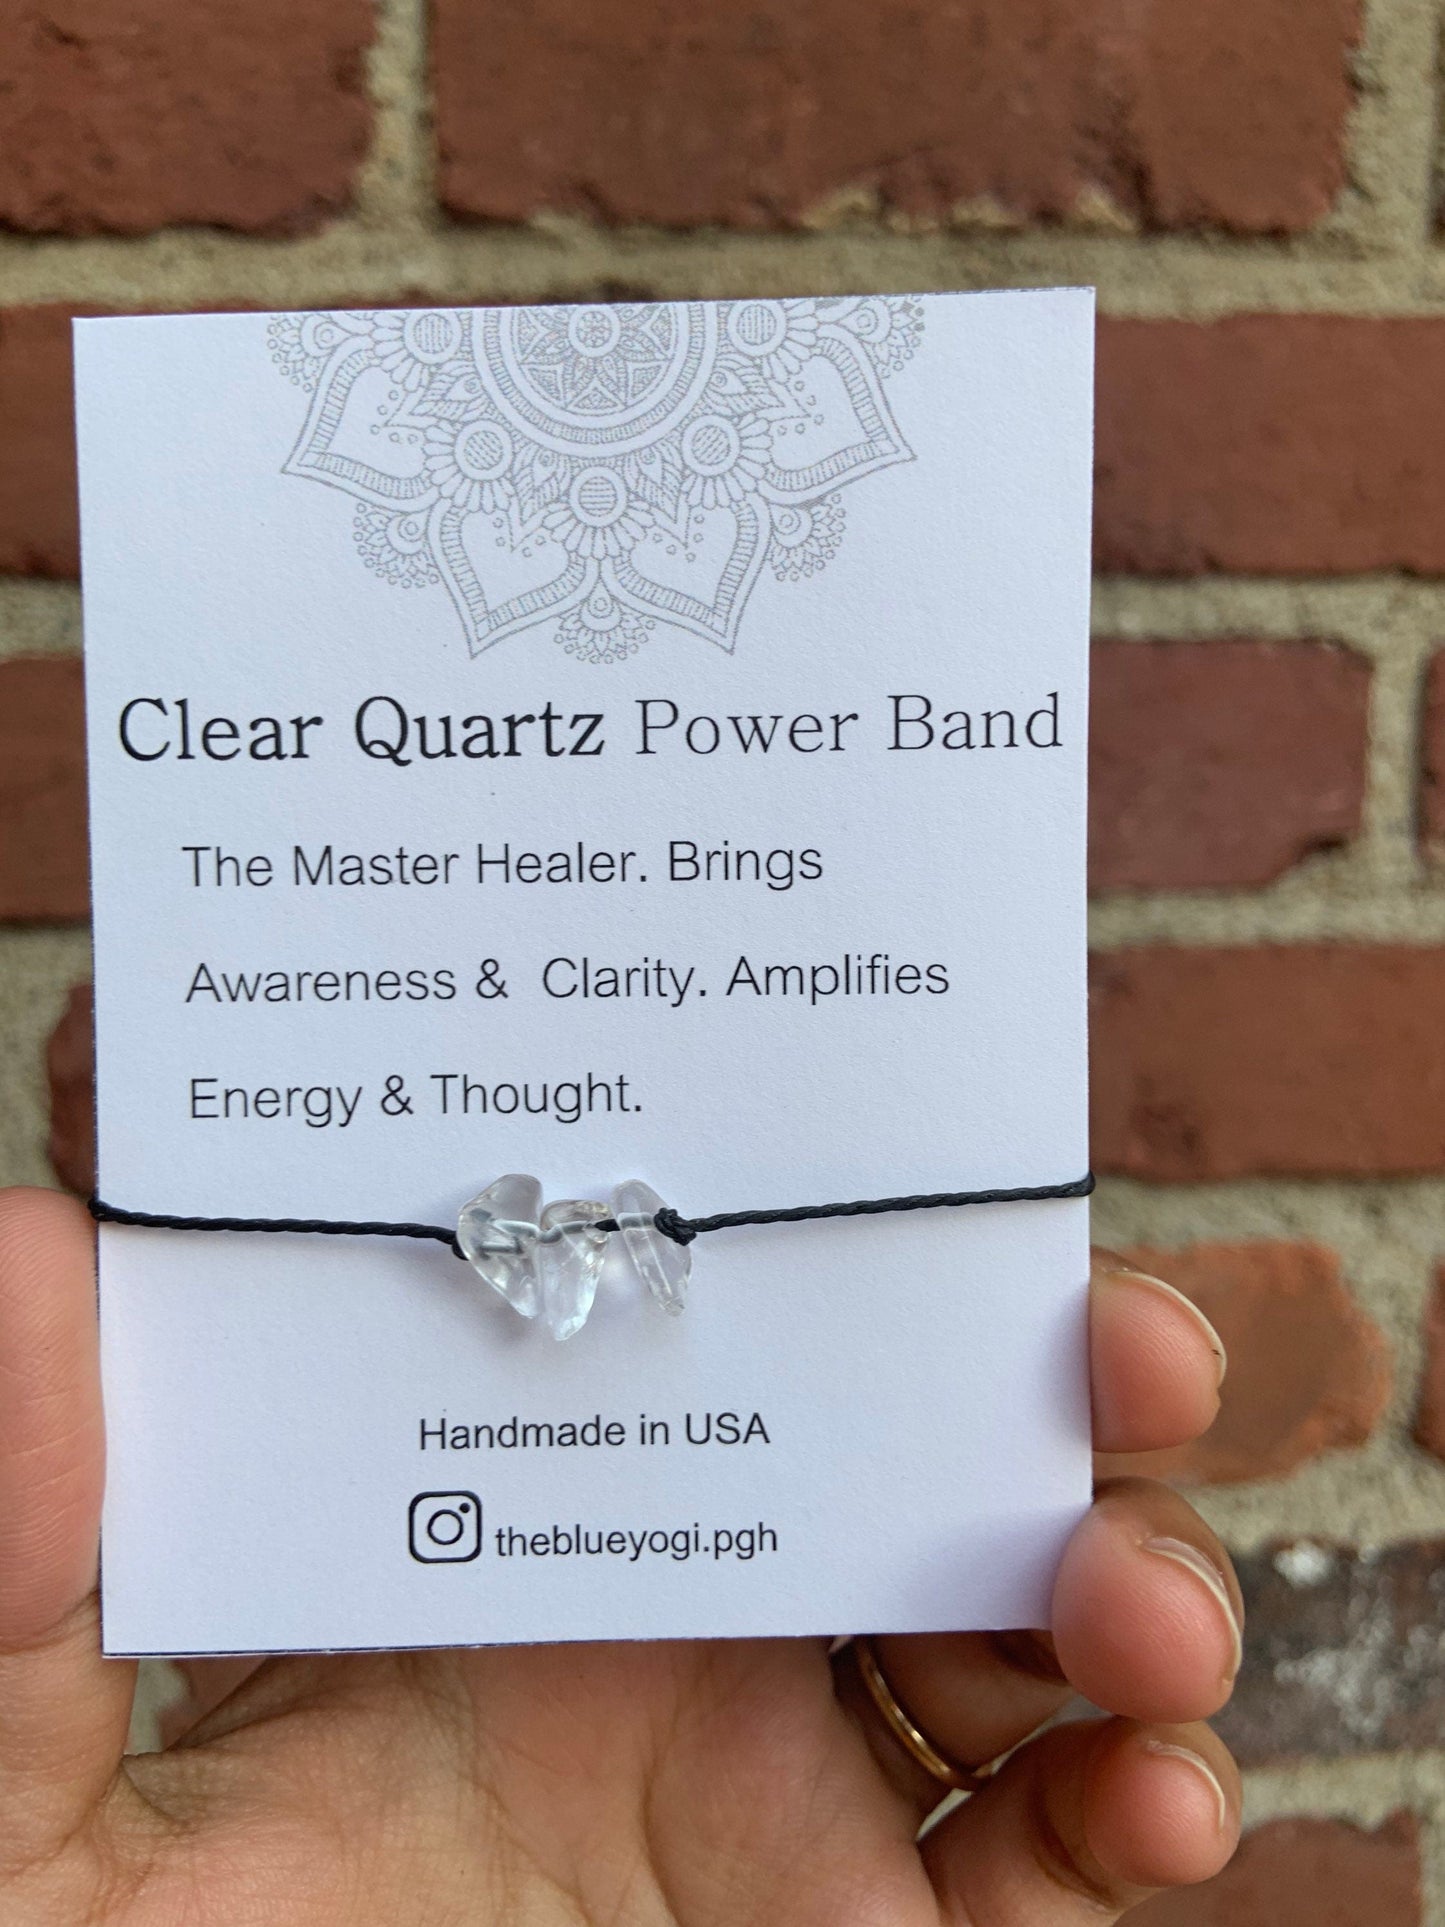 ClearQuartz Healing Band with an Affirmation